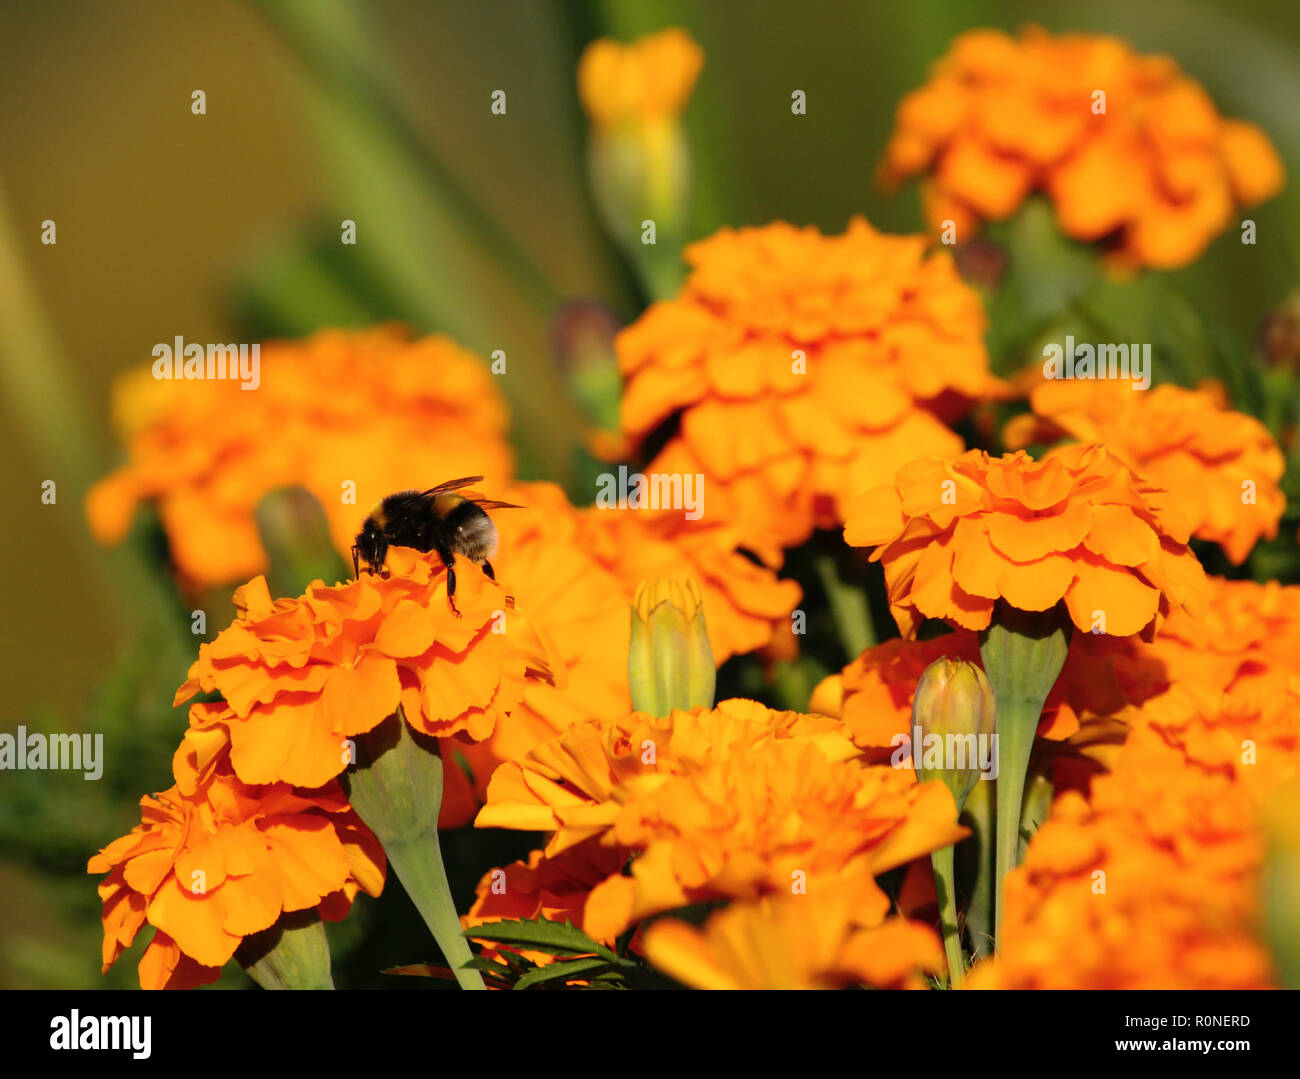 tagetes, a variety of flowers bonanza deep orange, a lot of flowers and on one sits a big bumblebee, a bright orange photo, sunny day Stock Photo